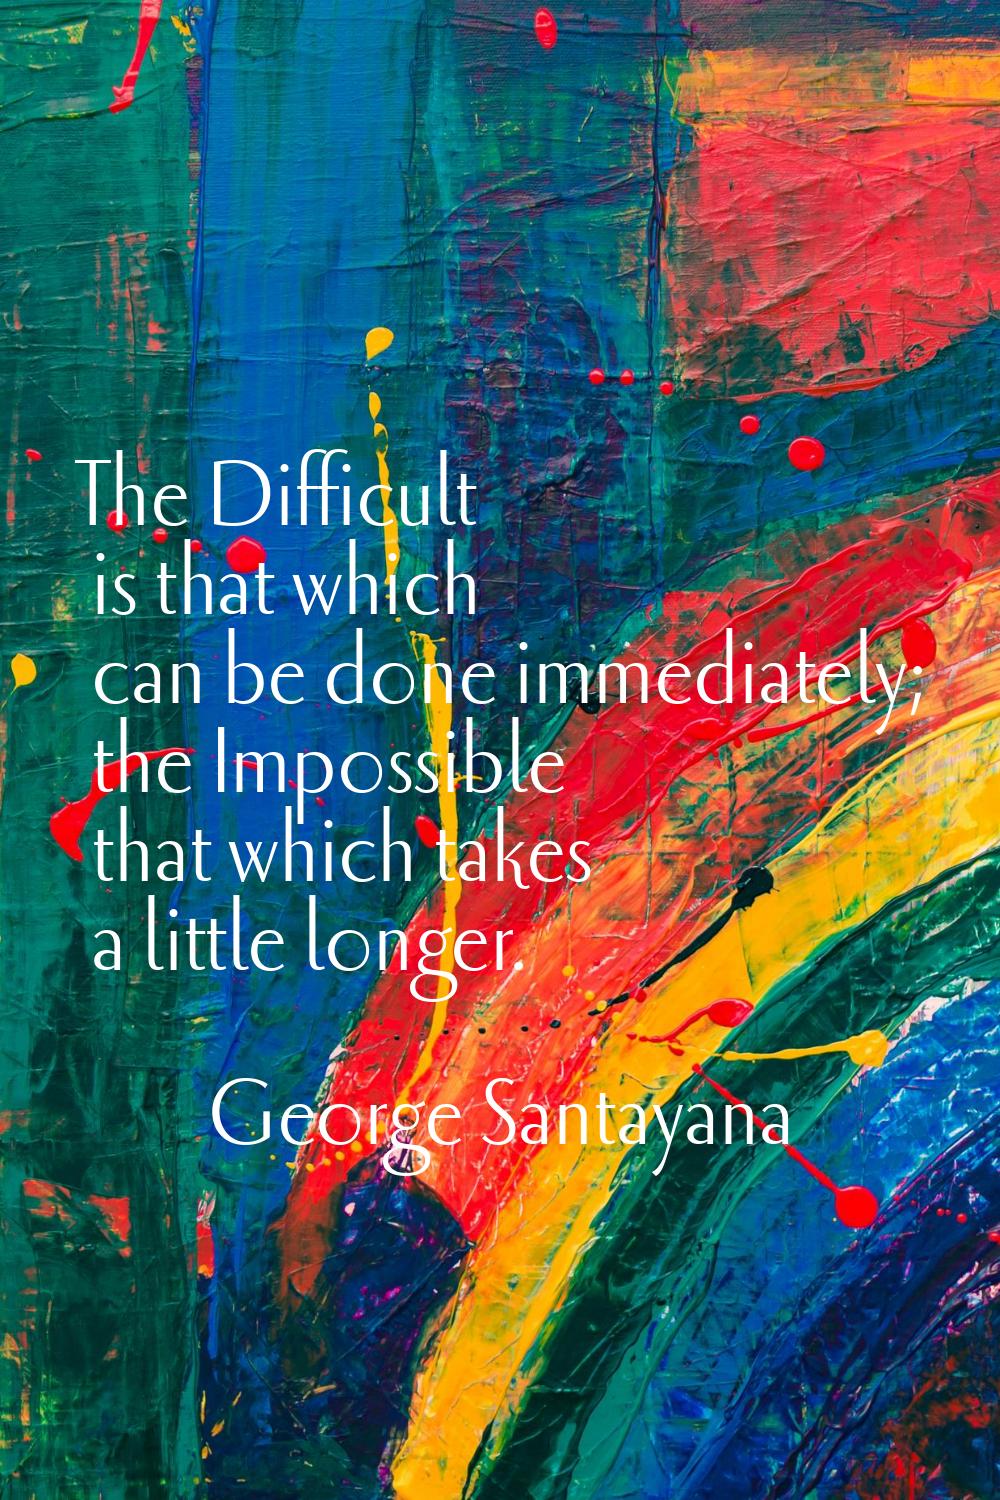 The Difficult is that which can be done immediately; the Impossible that which takes a little longe